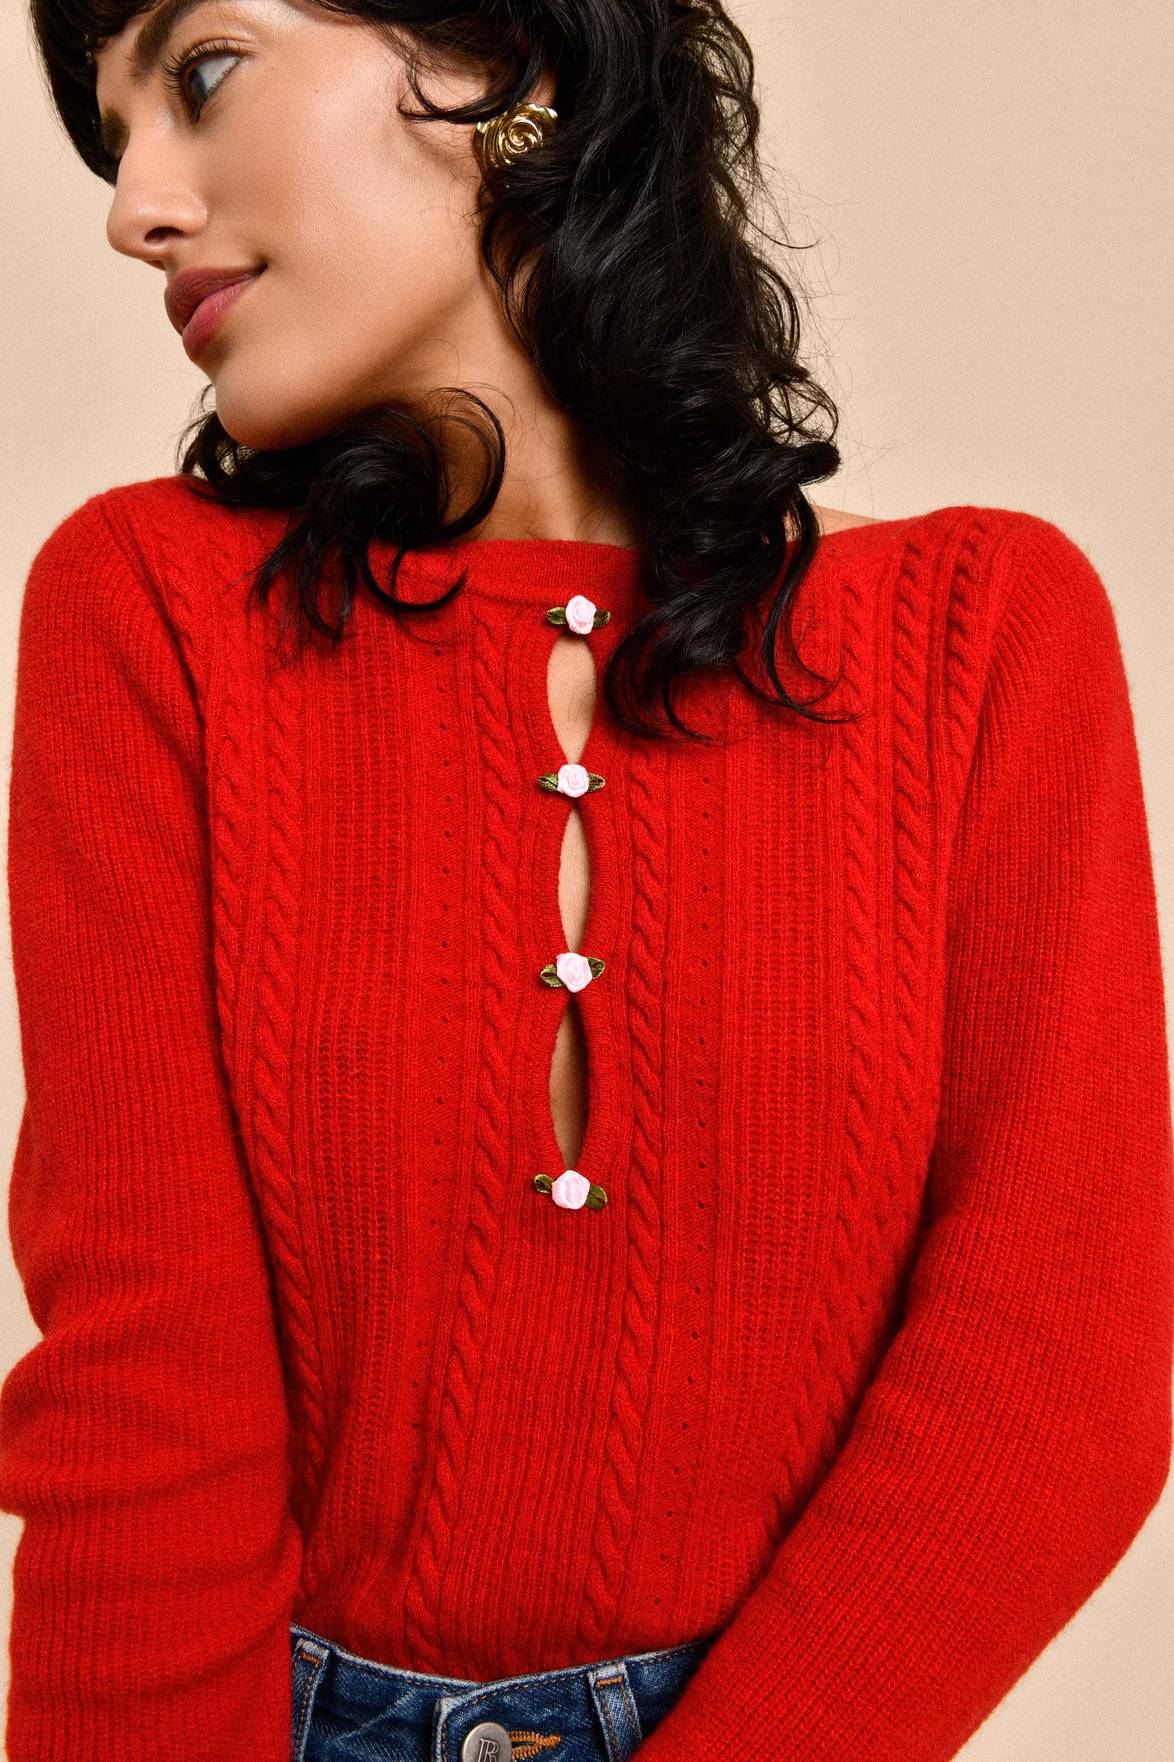 Stay cozy and chic in our Jersey Lauria. Made with a ribbed knit design and cable detailing along the neckline, this cardigan offers both warmth and style. The round neckline and three-drop button closure add delicate touches, while the subtle rose accents add a charming touch to this versatile piece